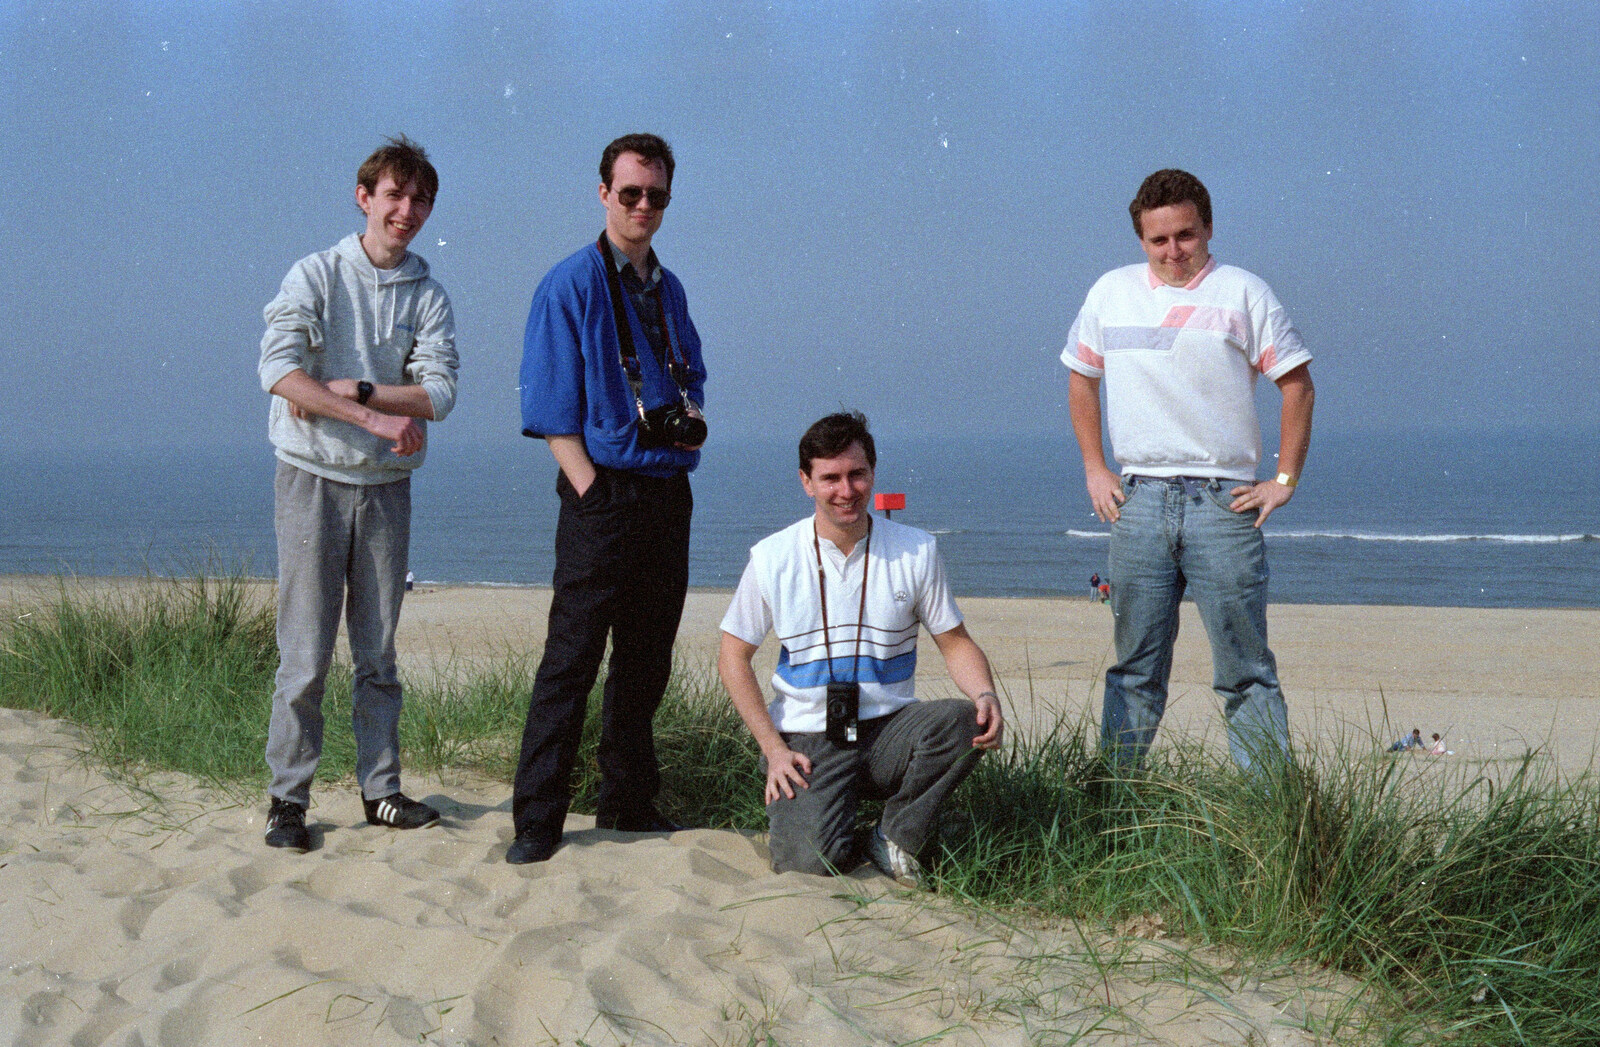 In the sand dunes at California, Norfolk from The Plymouth Gang Visits Nosher in the Sticks, Red House, Buxton, Norfolk - 20th May 1988